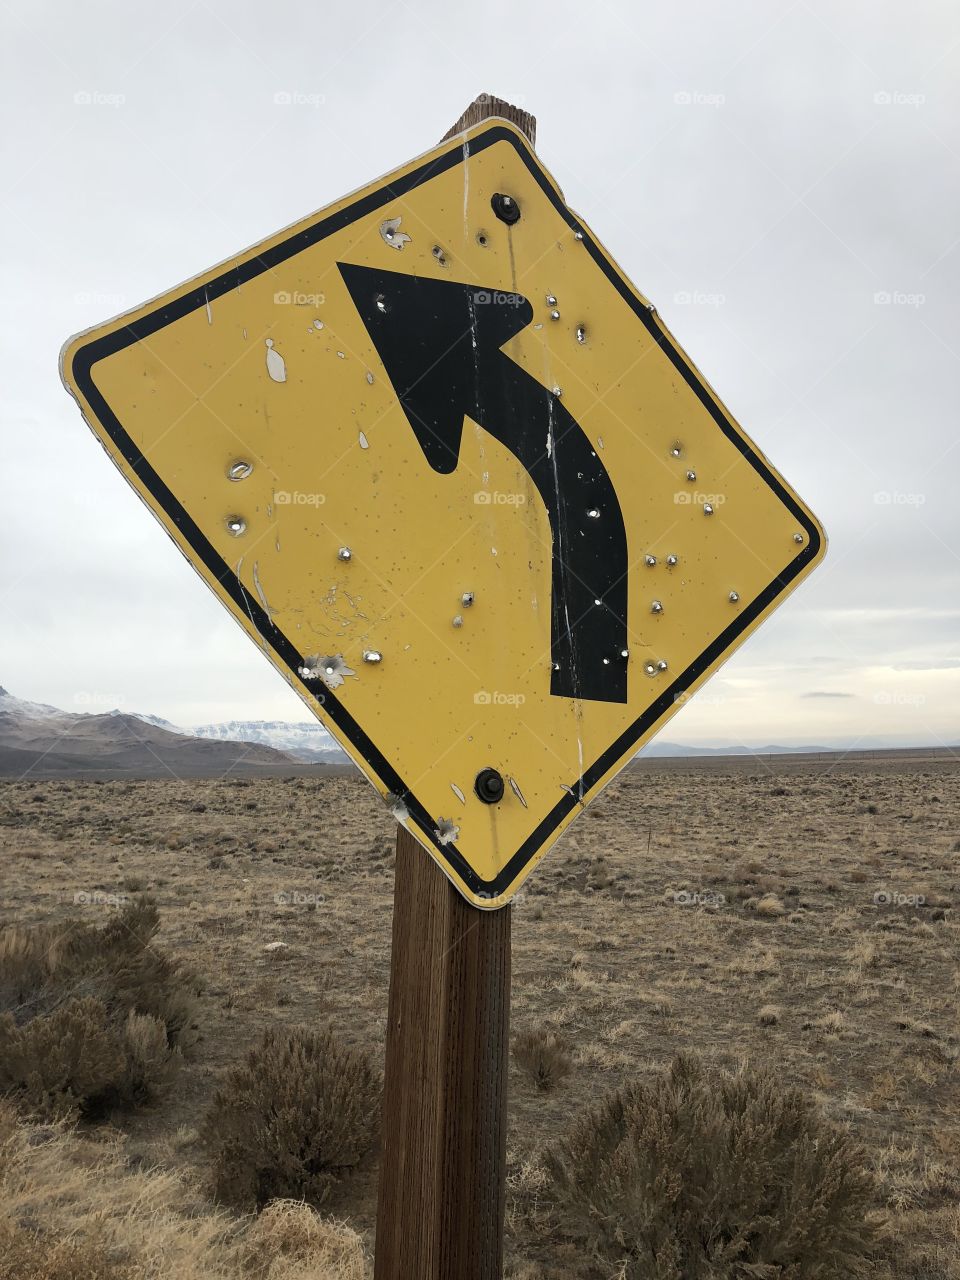 This sign is riddled with bullets. Located in the small town of Fields, Oregon this slight left turn sign has been the center of some serious target practice.